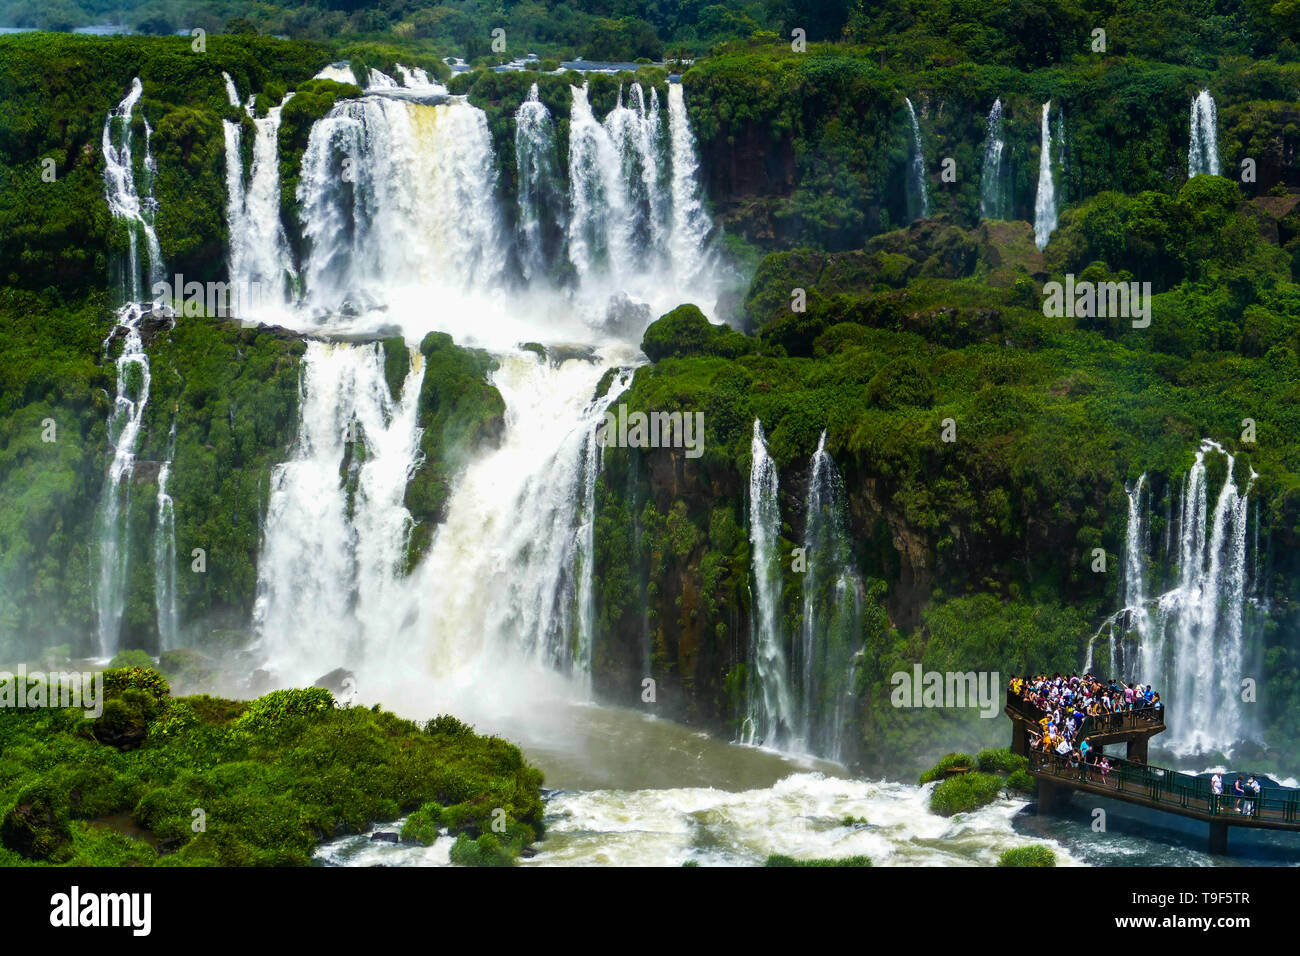 Tourists at Iguazu Falls, one of the world's great natural wonders, on the border of Brazil and Argentina. Stock Photo